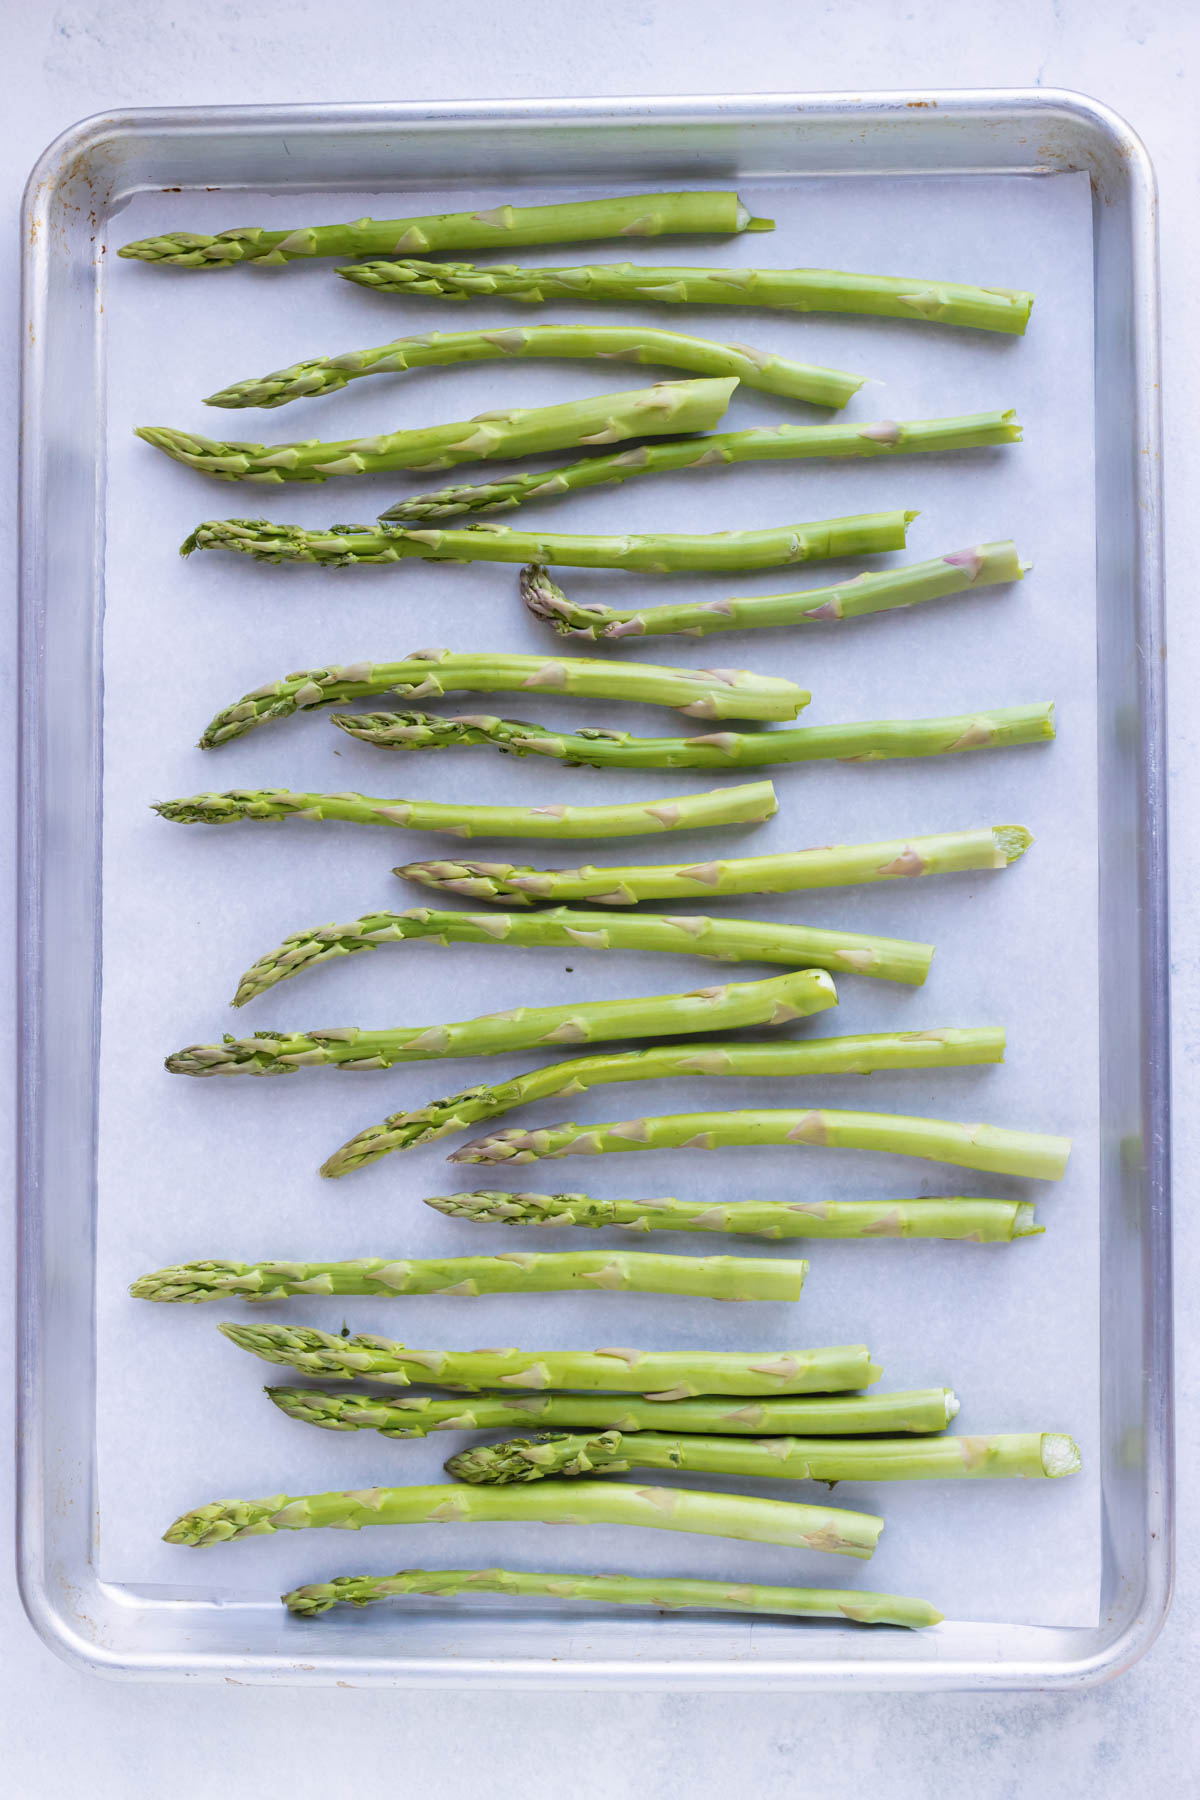 Asparagus spears roast in a single layer on a baking sheet.